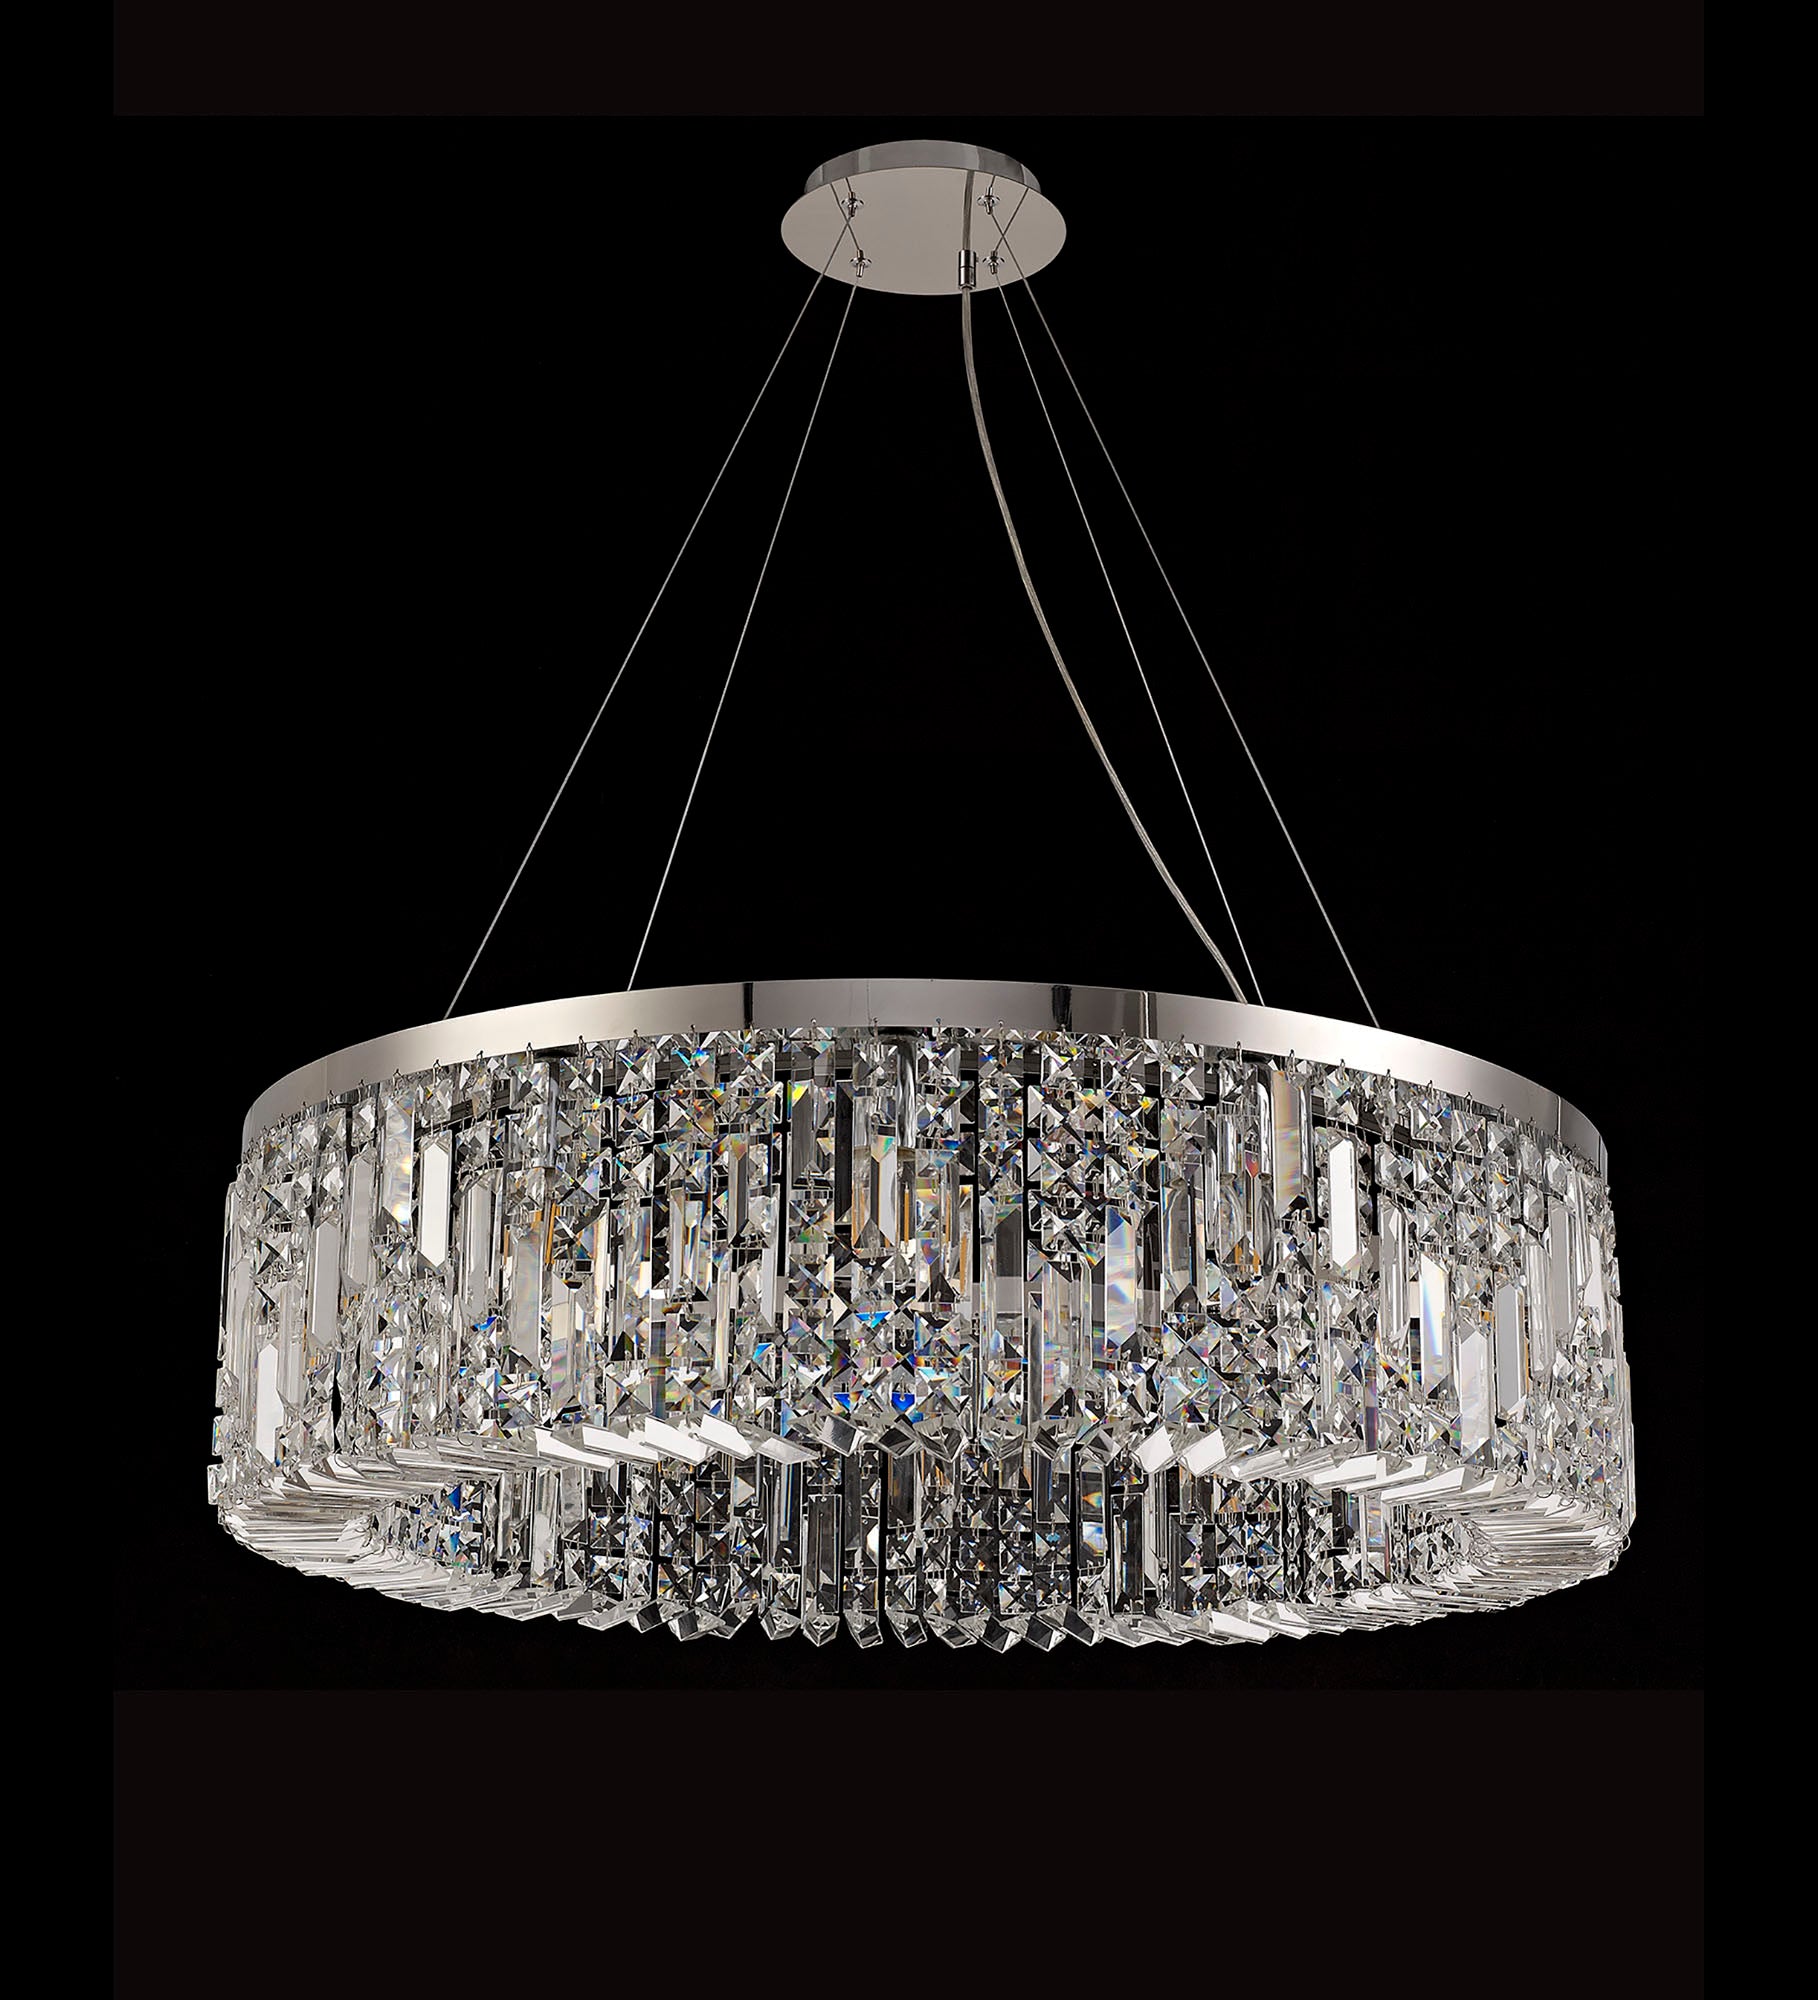 Mayfair 80cm Round Pendant Chandelier, 12 Light E14, Polished Chrome/Crystal Item Weight: 16.8kg - LO178083